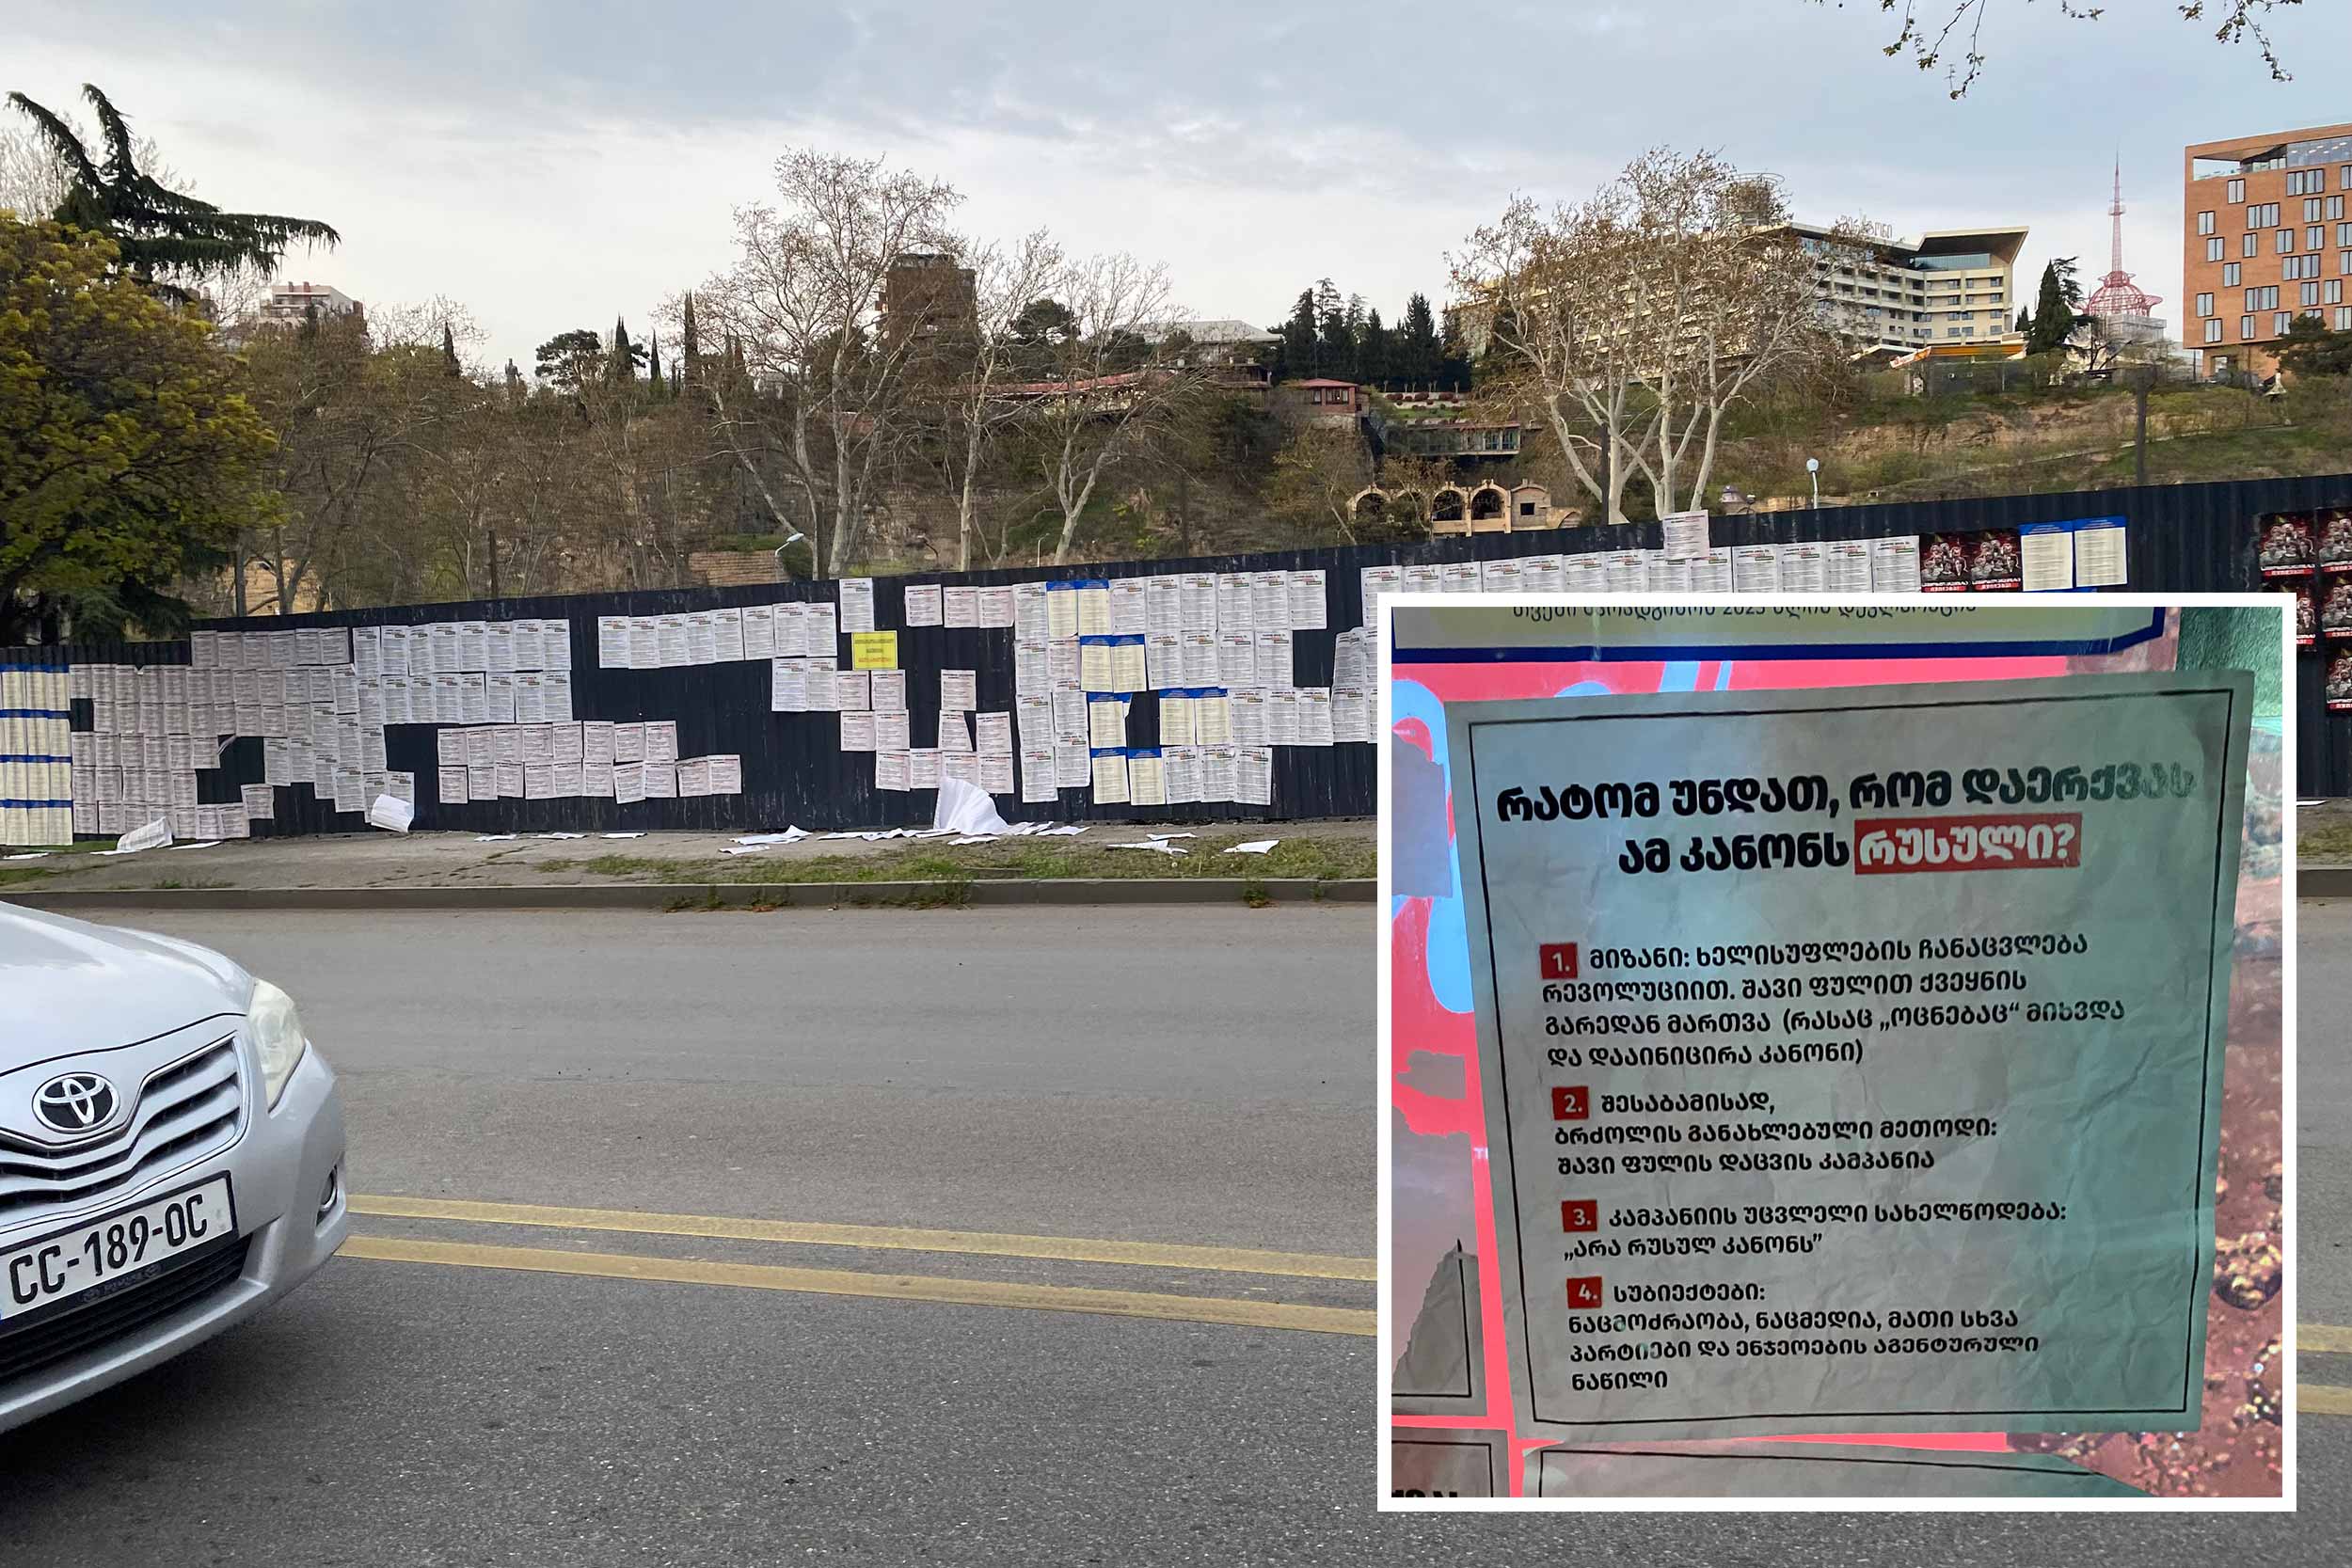 Posters plastered on all bus stations and fences in Tbilisi by the government explain why the law is not Russian in response to public outcry that the law is Russian. Inset: A close up f the poster. © Beka Bajelidze